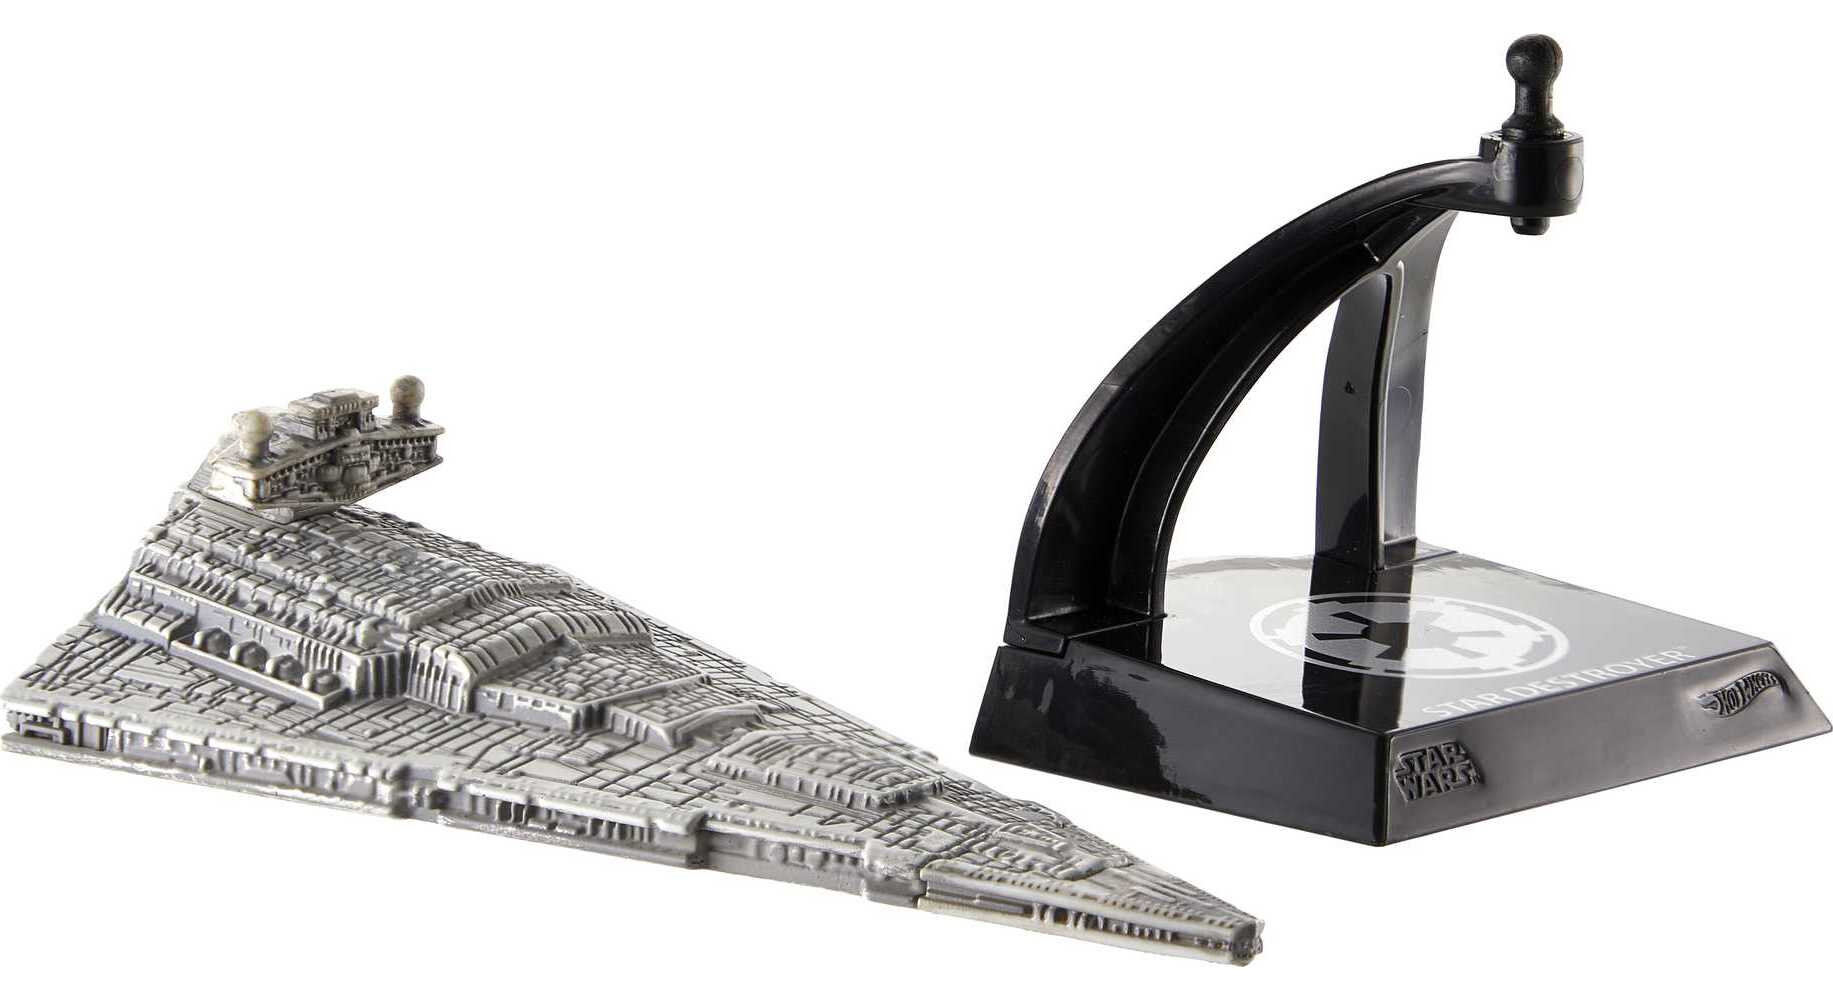 Hot Wheels Star Wars Starships Select, Premium Replica, Gift For Adults Collectors - image 5 of 5